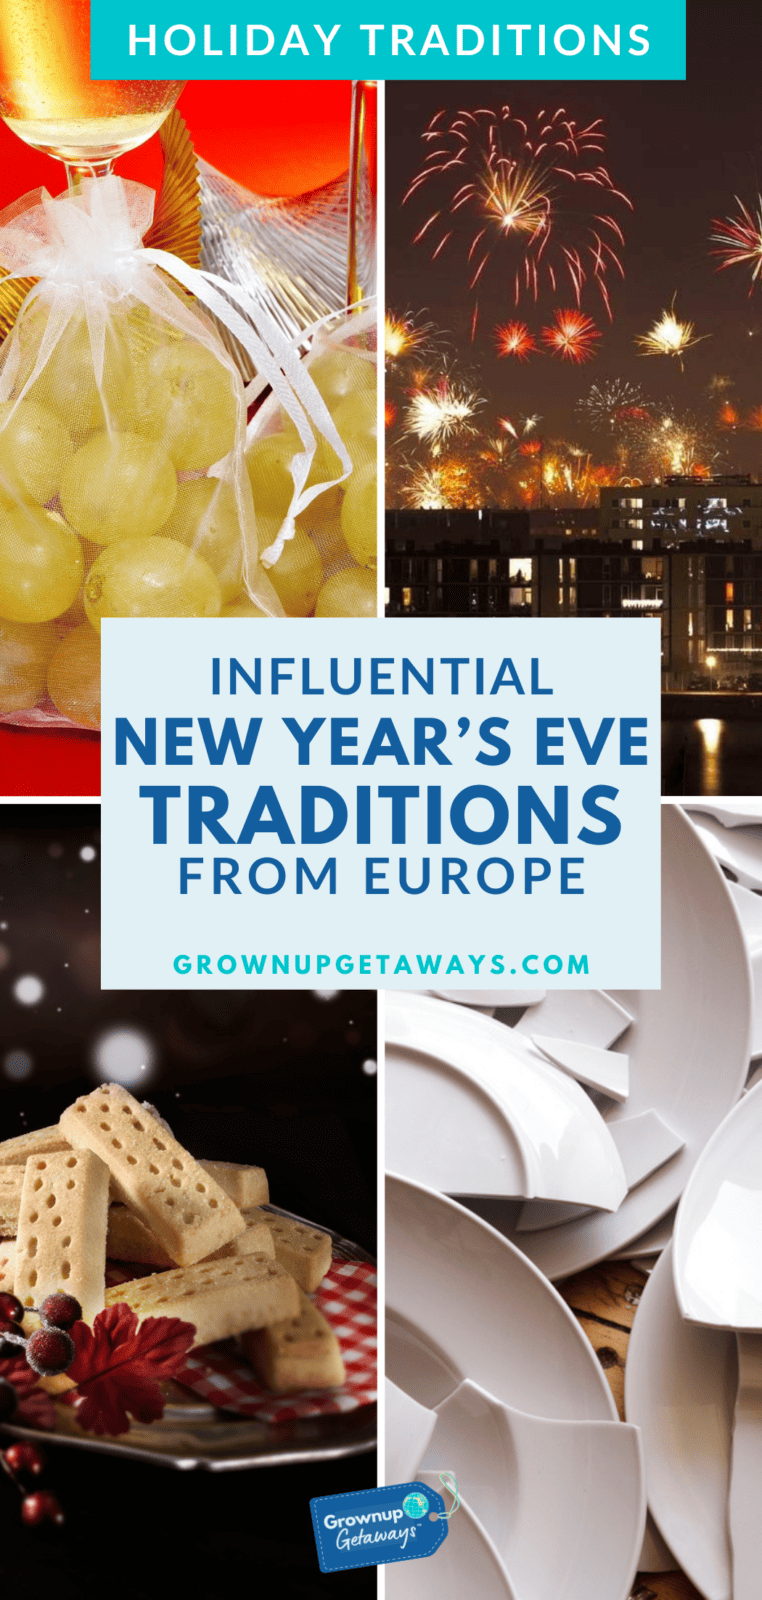 Influential New Year's Eve Traditions for Europe